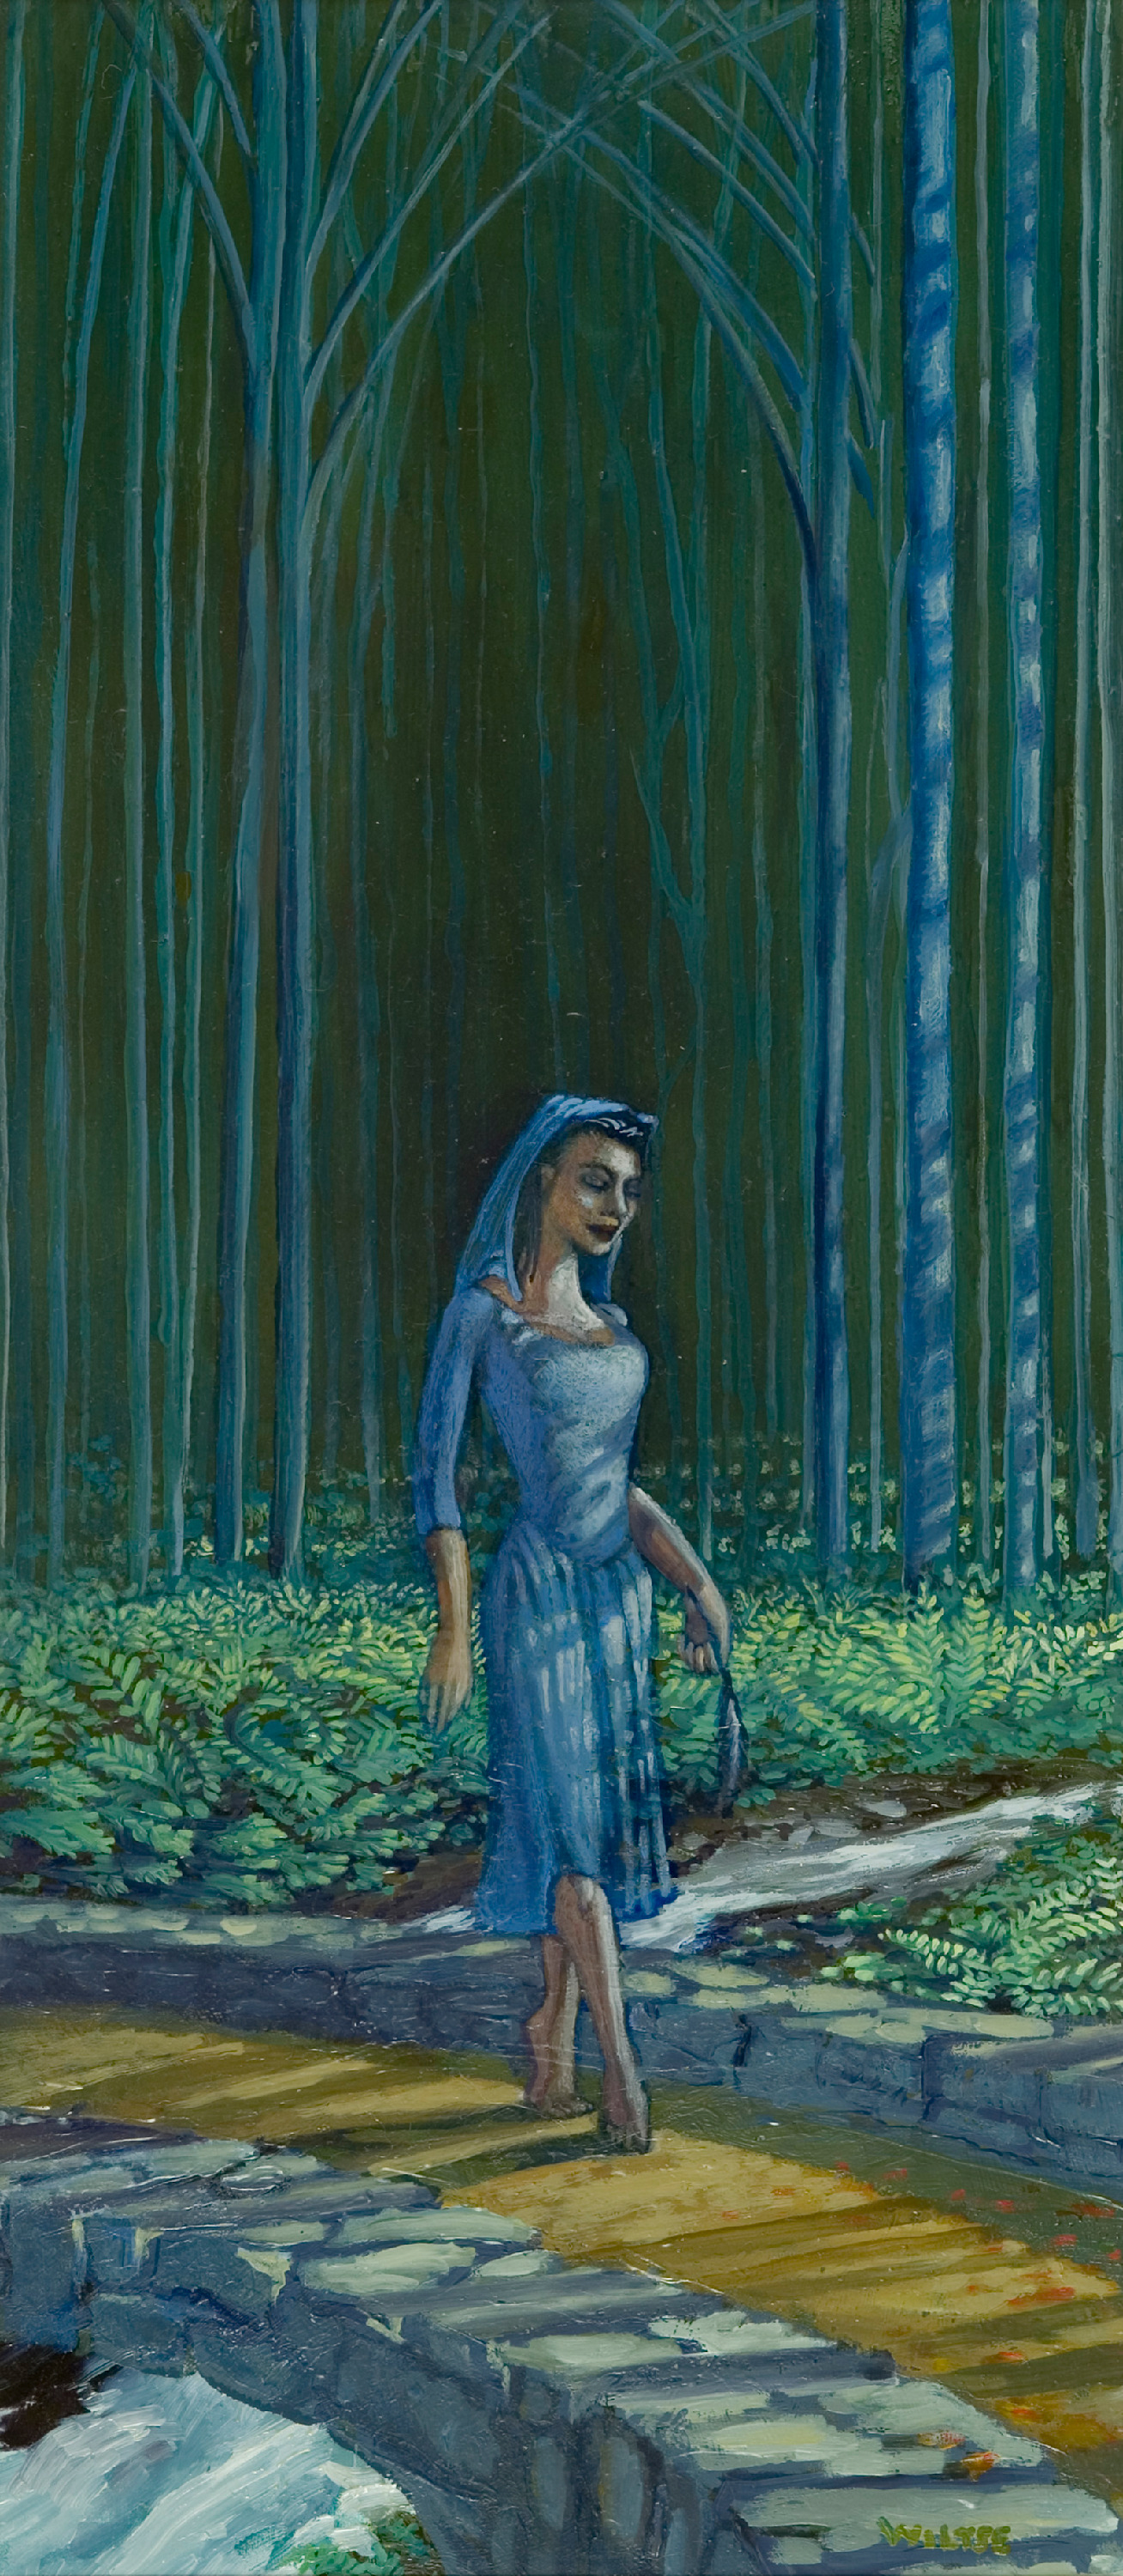 Mary walks in the woods jvpl0a